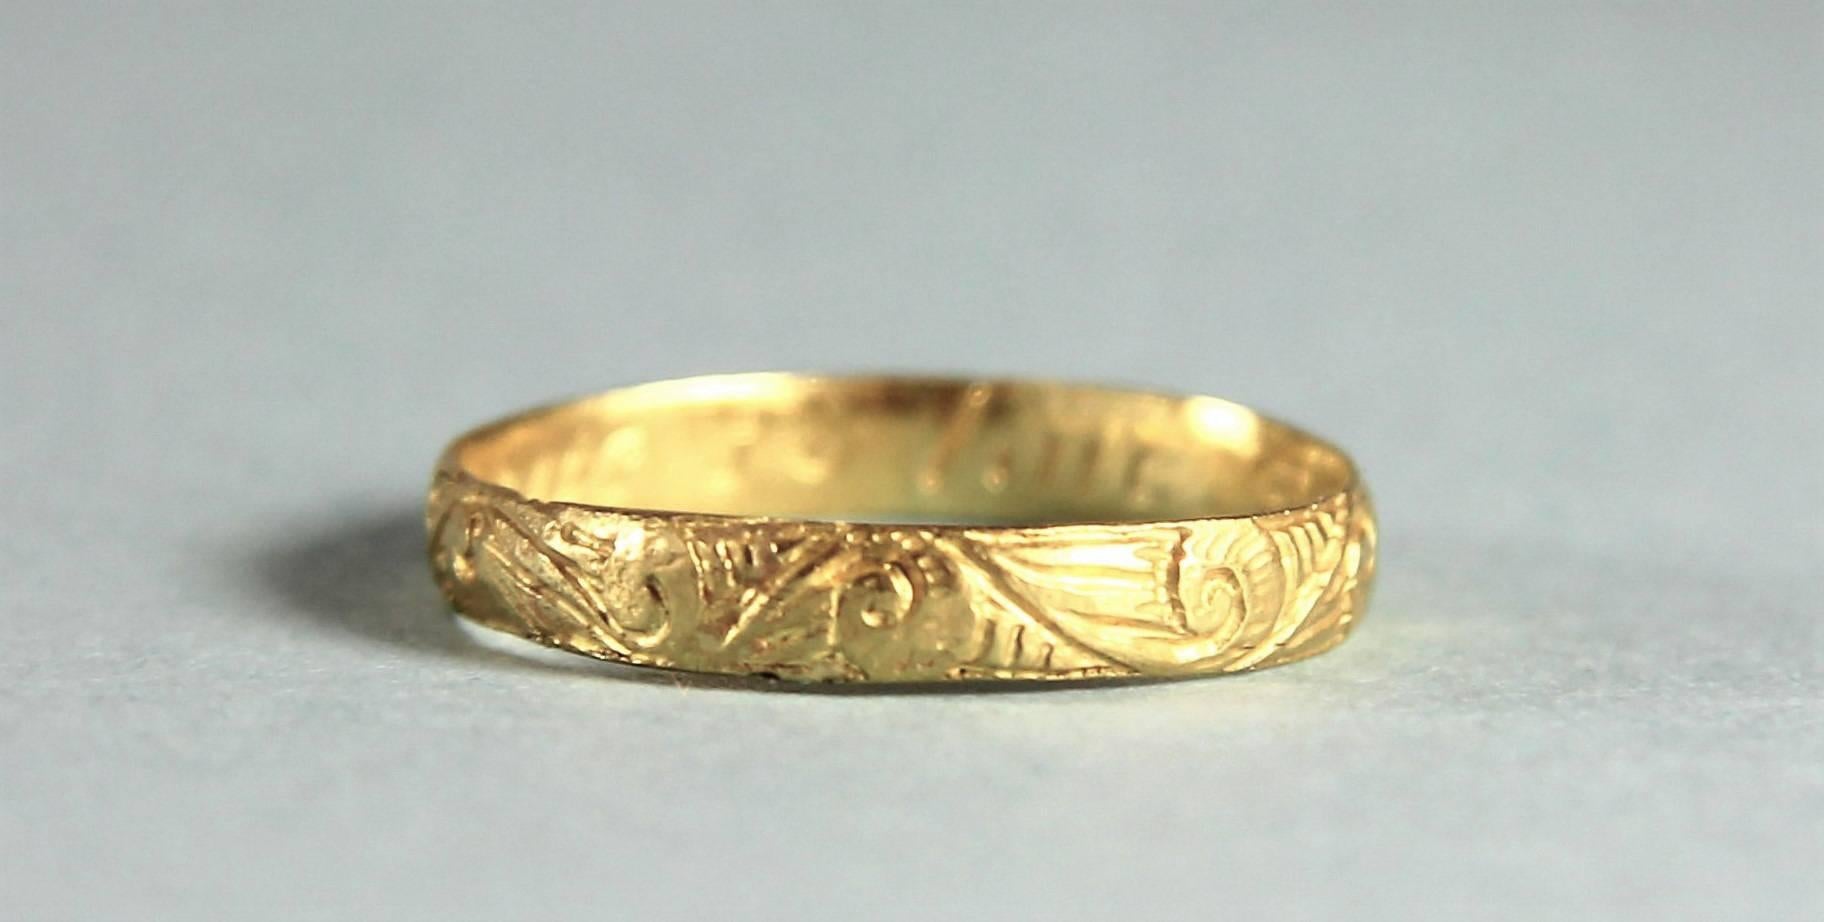 Delicate and very attractive 17th century chased posy ring of high grade gold.
Maker's mark: R. circa 1650

The outside of the ring is chased with foliate scrolls. The inside of the ring is engraved in contemporary script 'Live to love